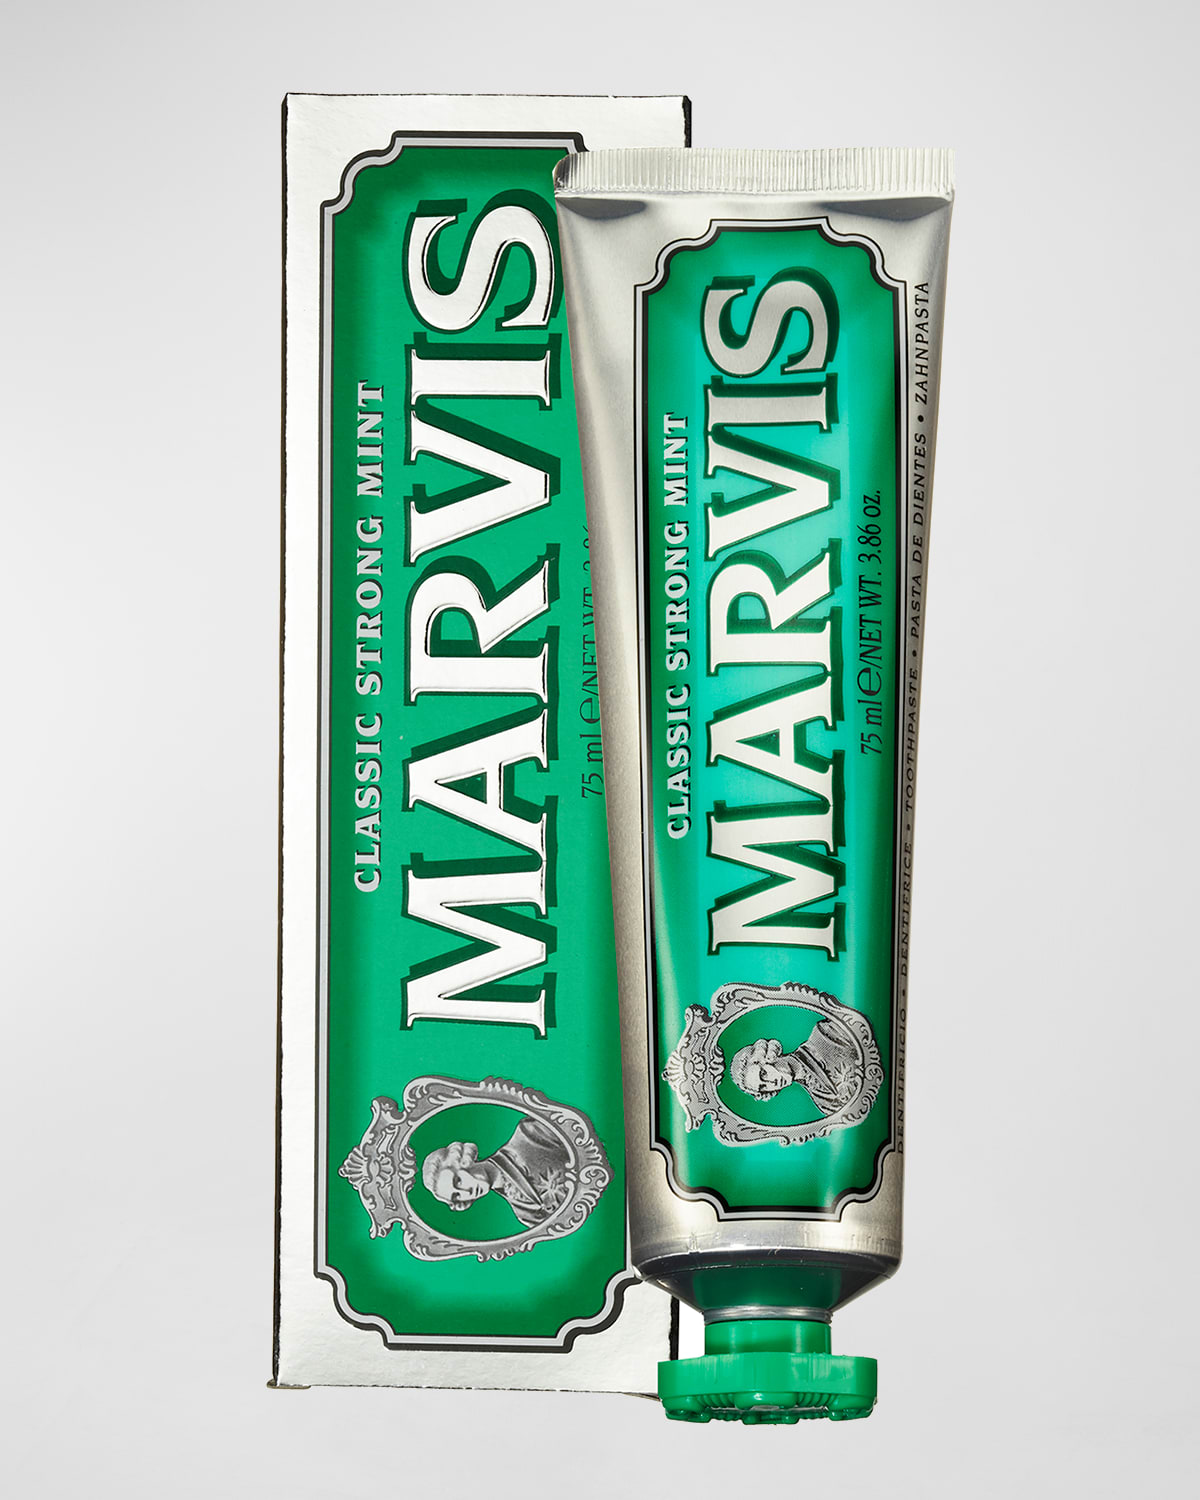 Marvis Classic Strong Mint Toothpaste, 3.8 oz.